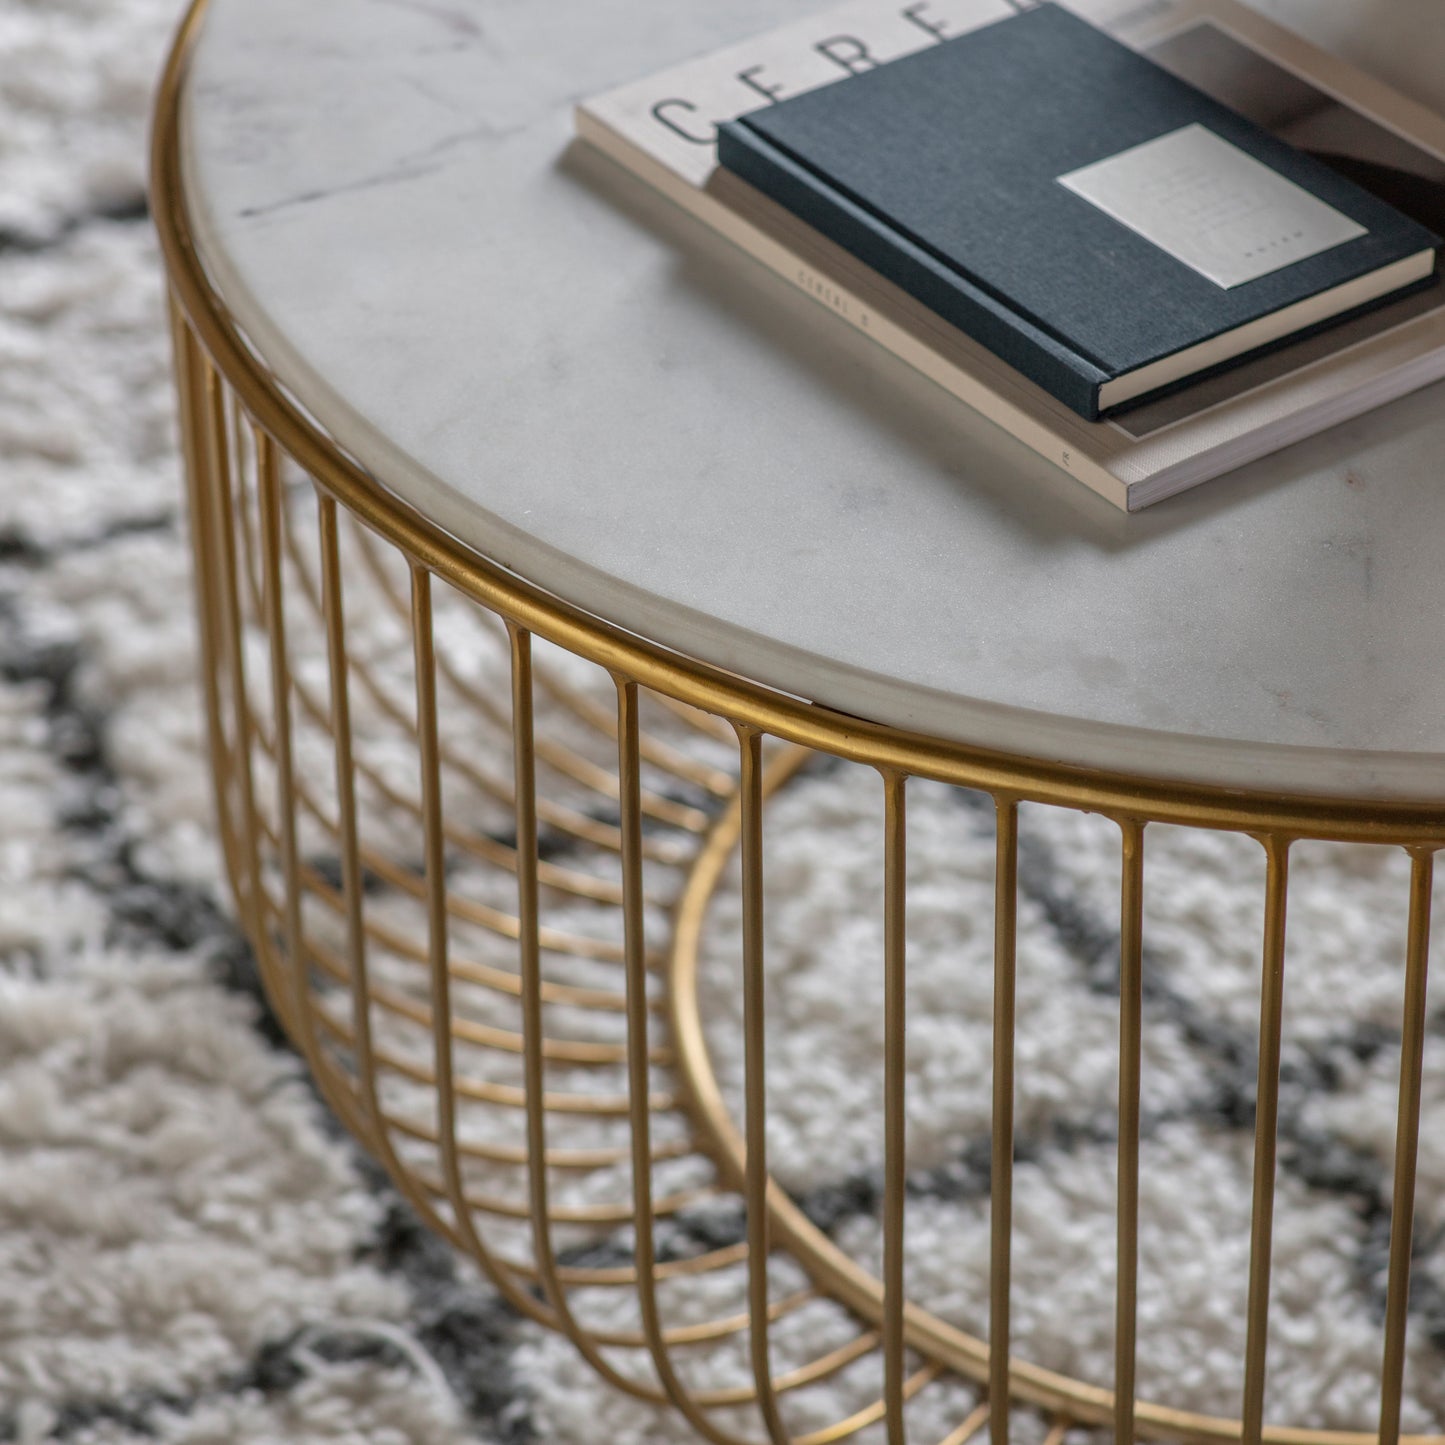 An interior decor statement piece, the Riley Coffee Table Gold from Kikiathome.co.uk beautifully showcases a book.